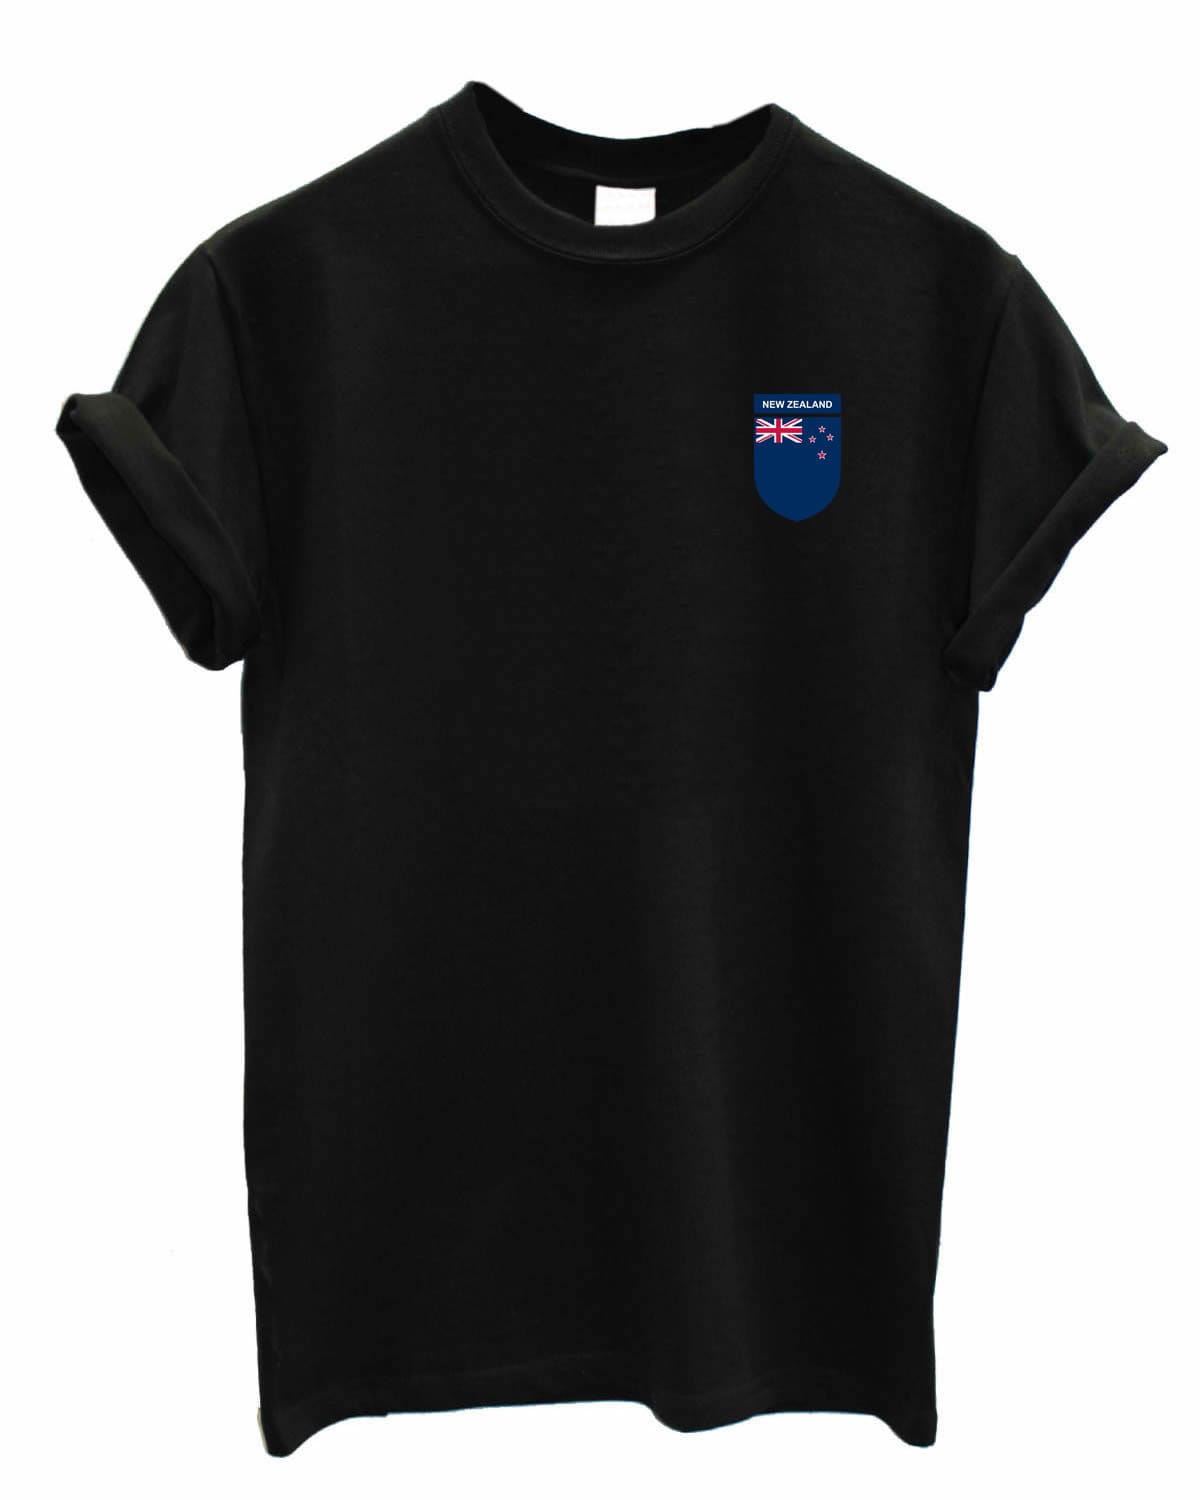 NewZealand Team Crest Unisex Crew neck Tshirt Support your Country football rugby cricket New Zealand